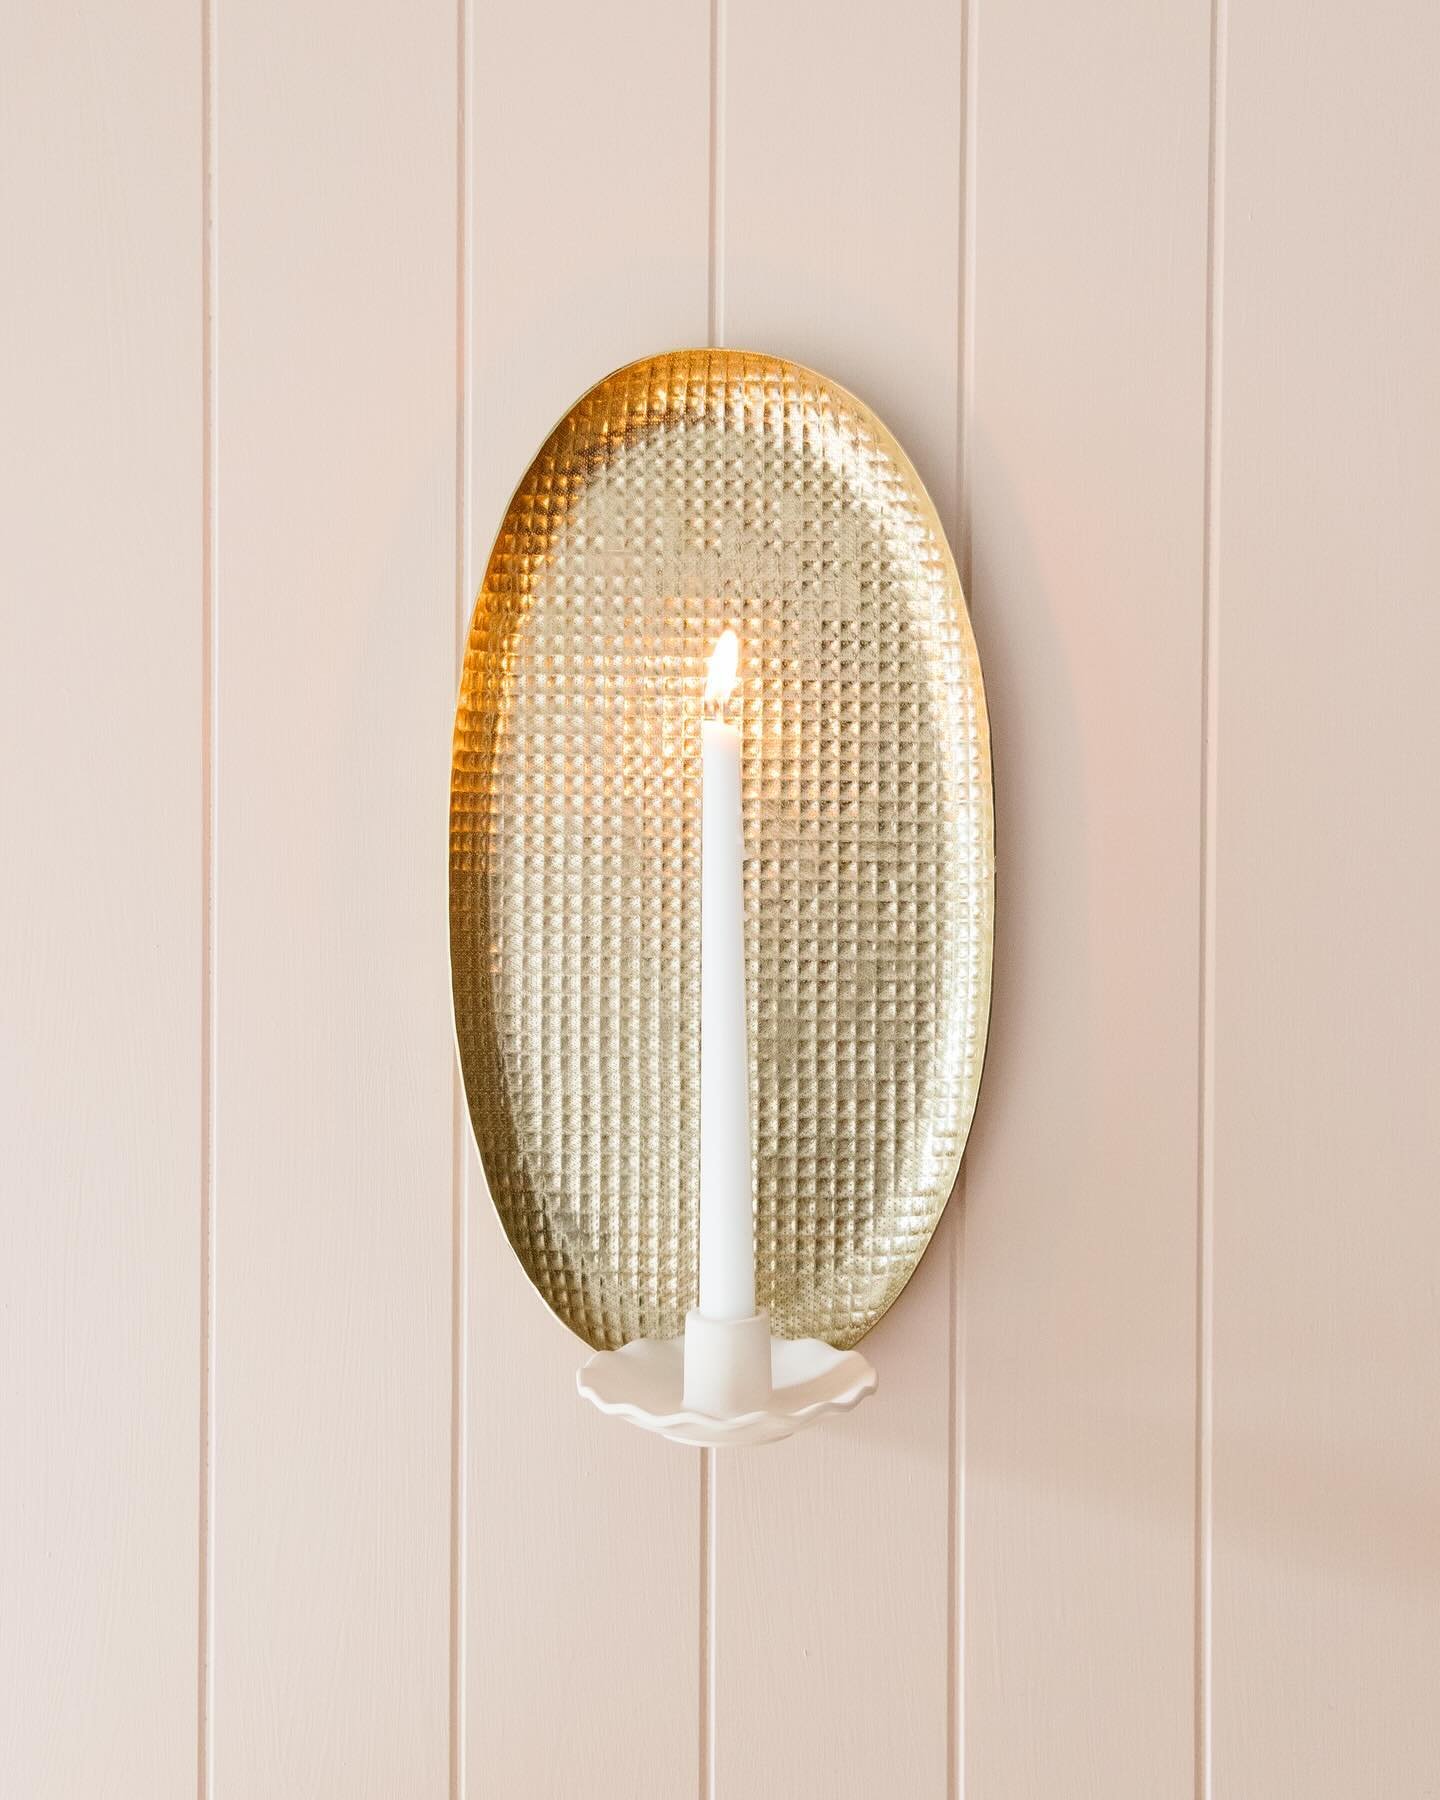 DIY Candle Wall Sconce 🛠️ I&rsquo;ve always loved wall sconces and since the evenings are finally cooling down, I thought it would be nice to try making a candle wall sconce to make our home feel cosy. I used a metal plate I thrifted from a charity 